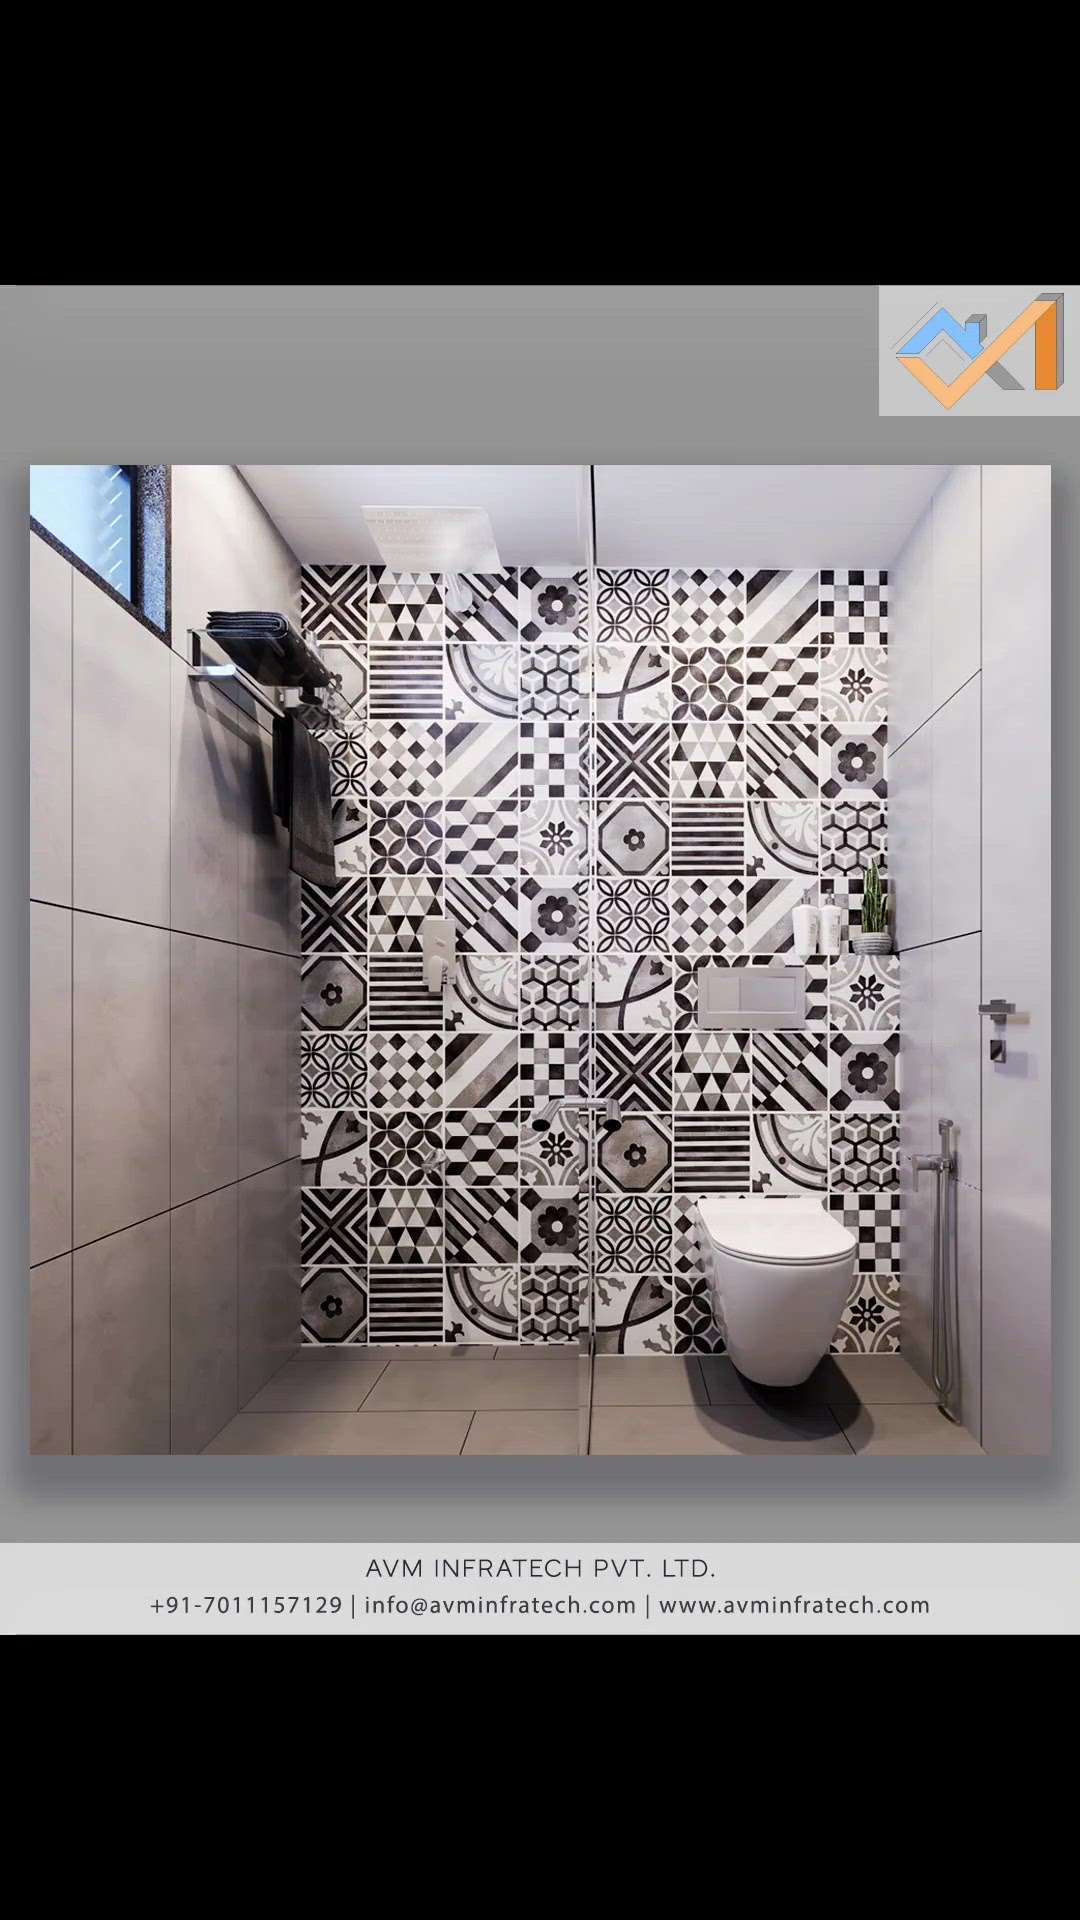 Don’t be excessive – you don’t need all the walls of the same color and material. Make an accent wall or highlight a shower or a sink with such an accent.


Follow us for more such amazing updates. 
.
.
#bath #bathroom #bathbomb #bathandbodyworks #bathtime #bathroomdesign #bathart #bathgoals #avminfratech #bathroomreno #bathroominspiration #bathroomideas #bathroomgoals #bathroomrenovation #masterbathroom #highlights #highlight #highlighter #highlighterpalette